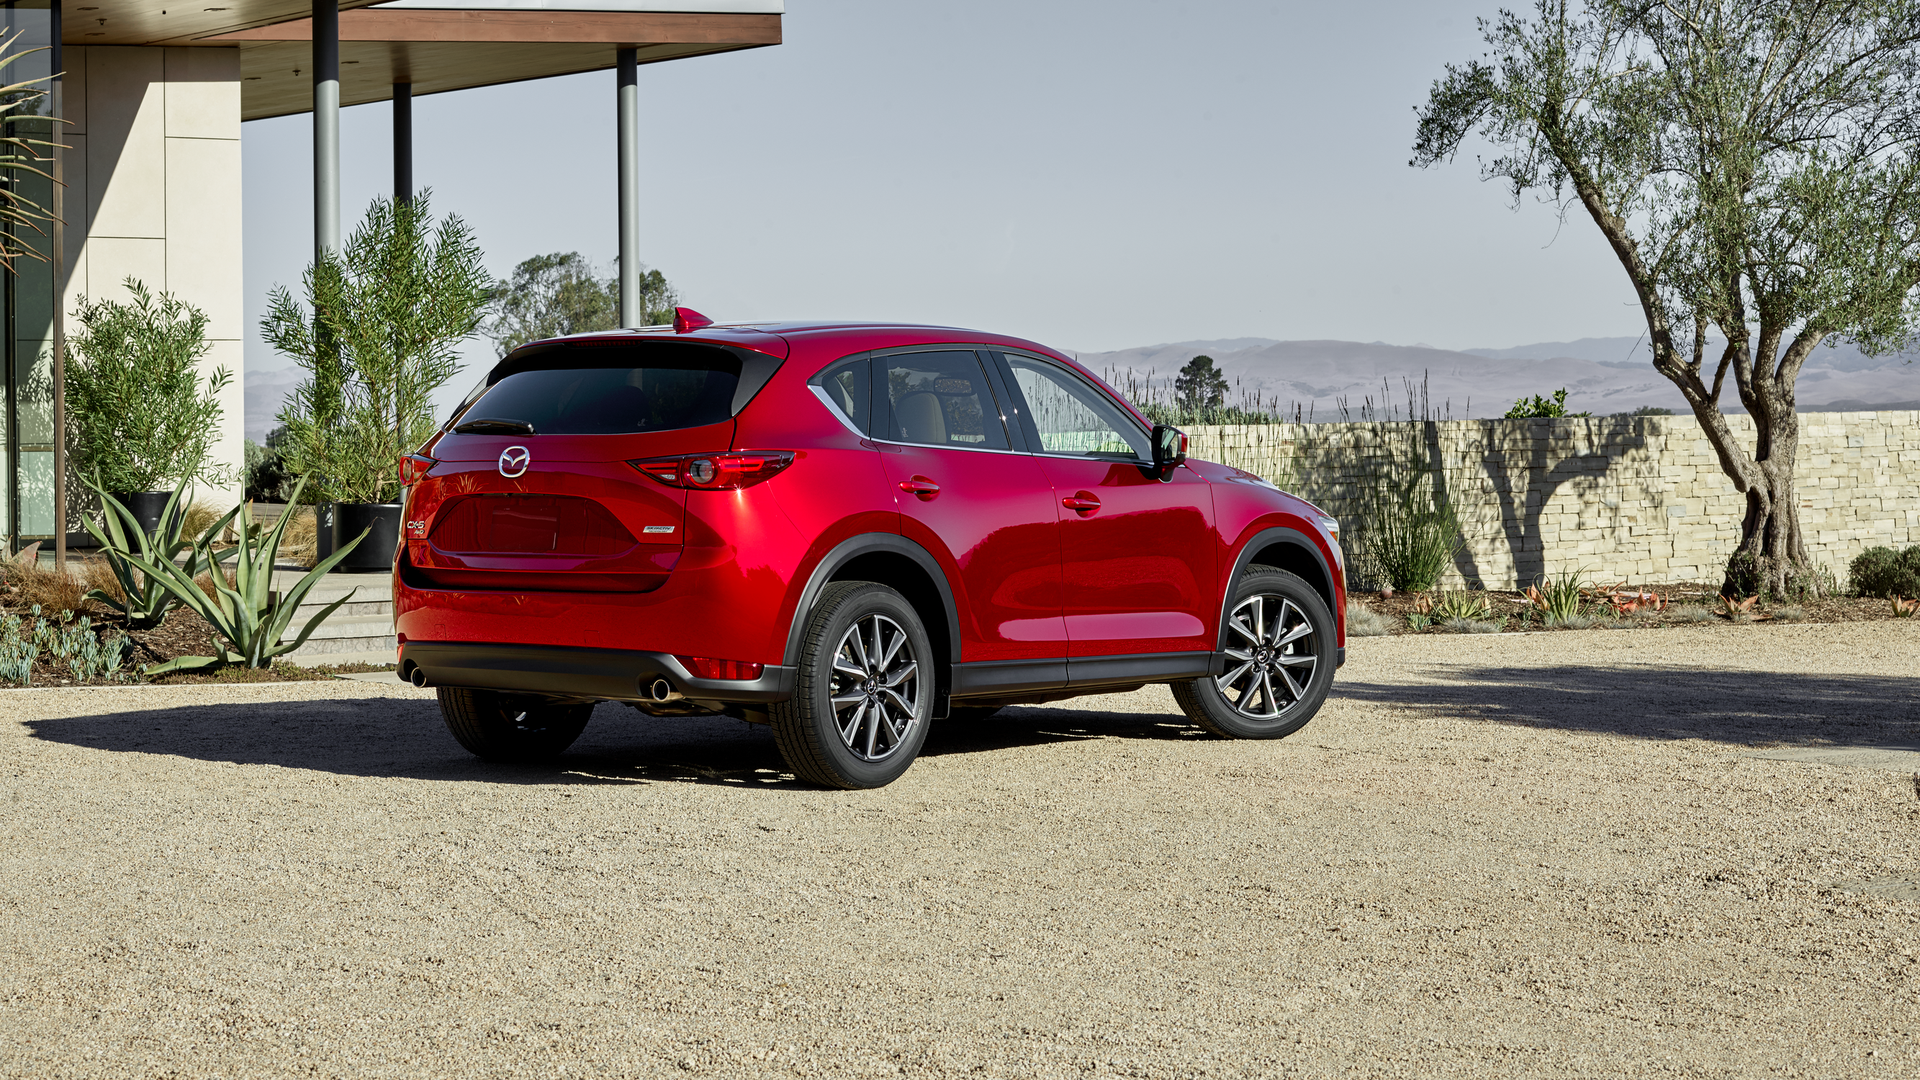 Image of red Mazda CX-5 compact SUV